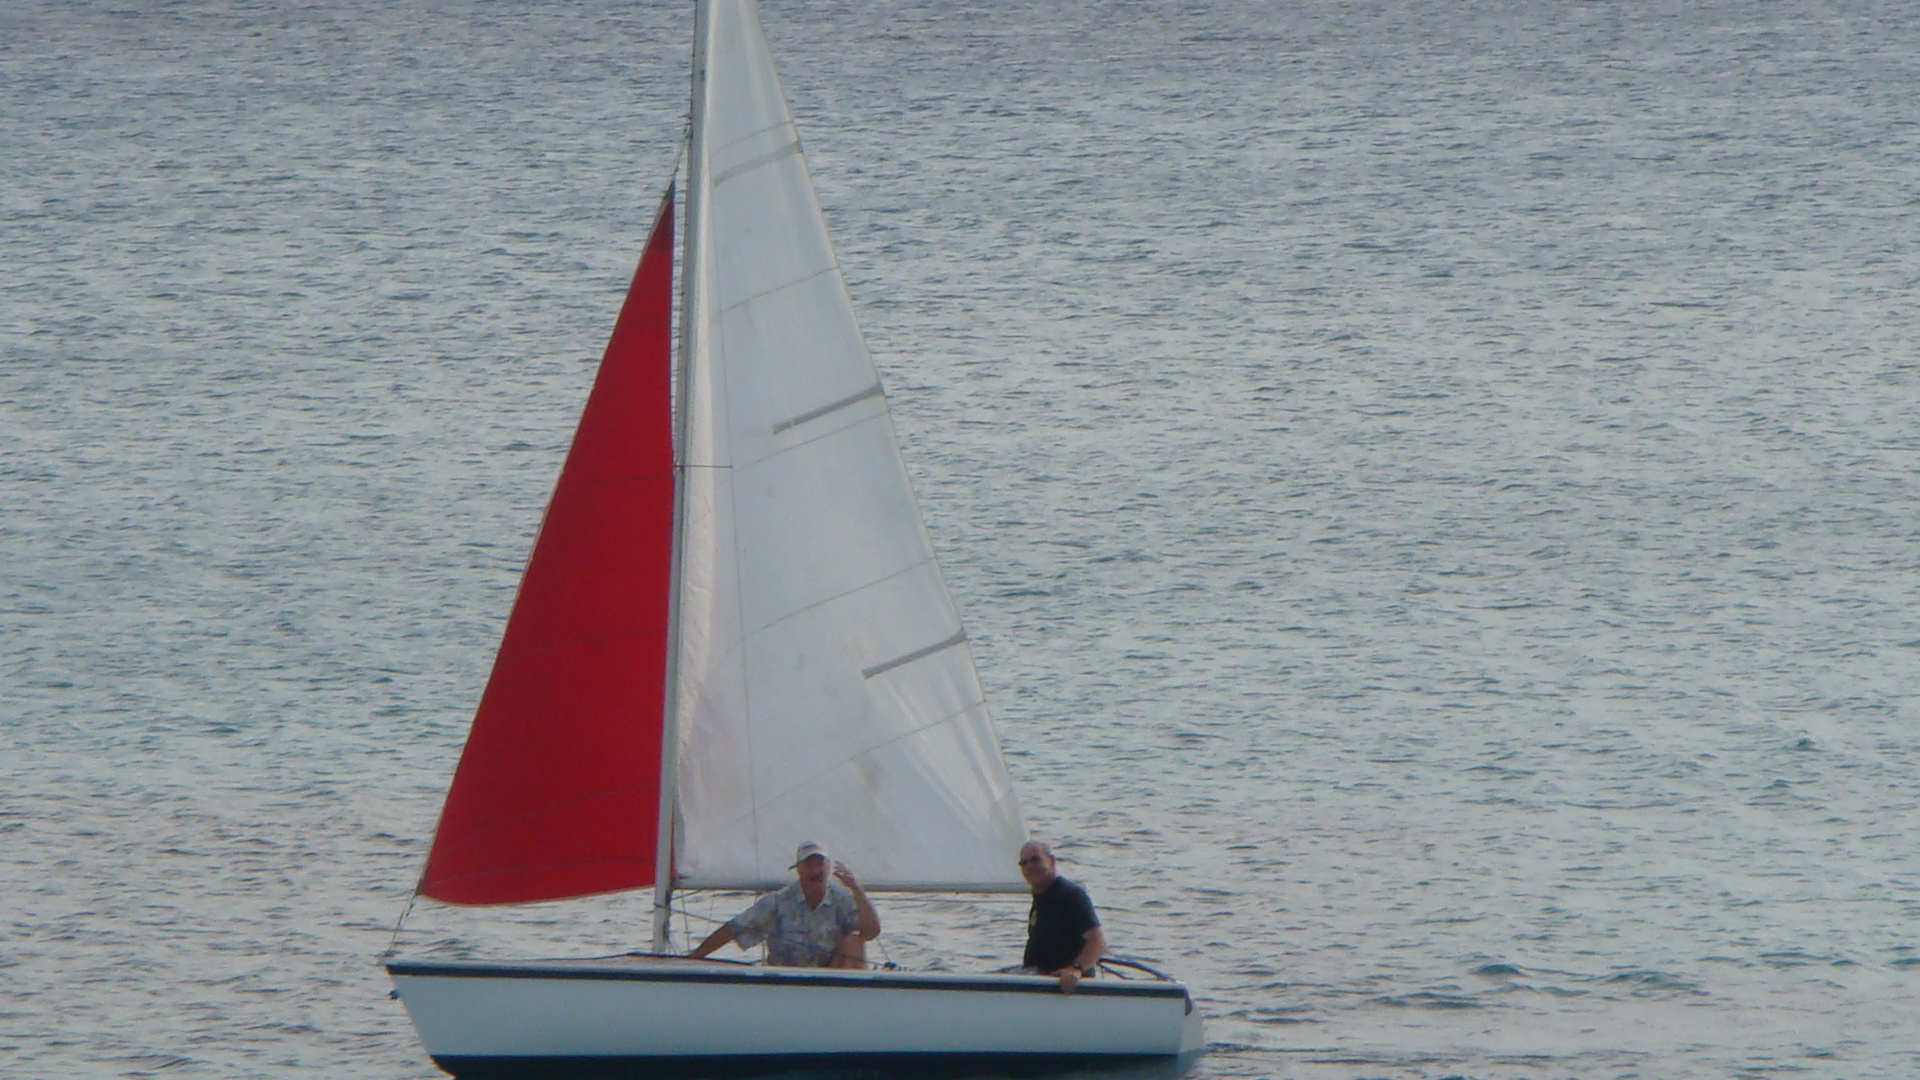 Sandy and Willy in Willy's sailboat